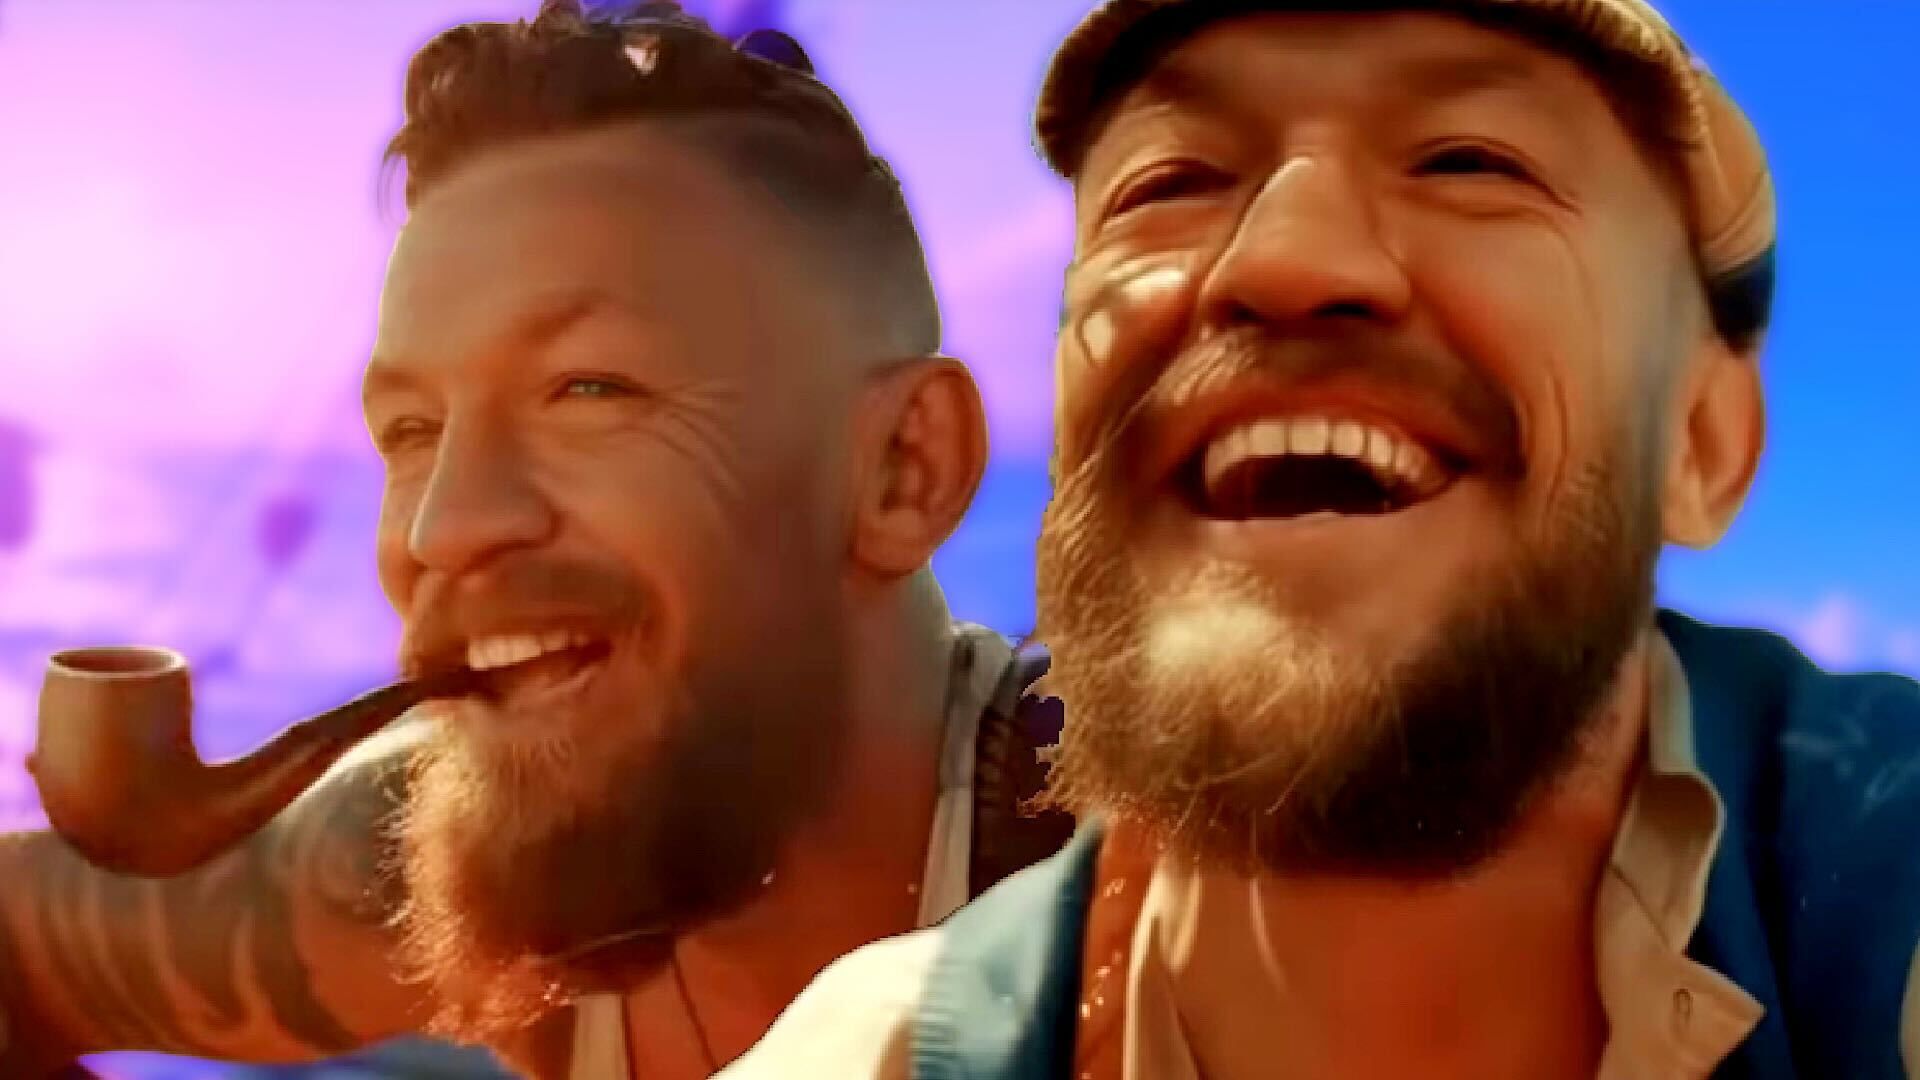 Conor McGregor imagined as Popeye the Sailor in AI-generated fan trailer